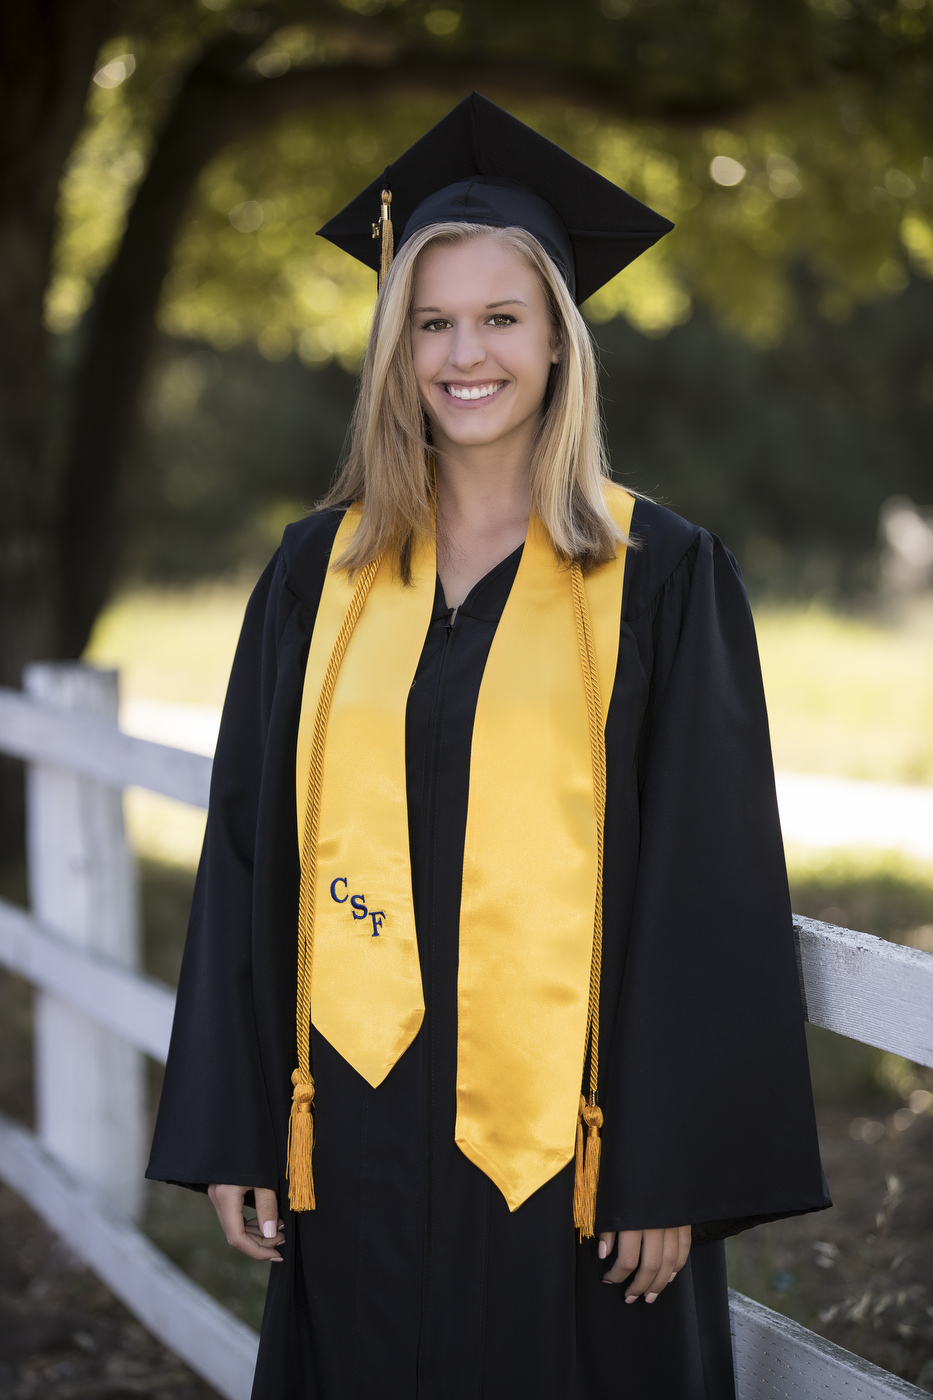 Girl in graduation gown